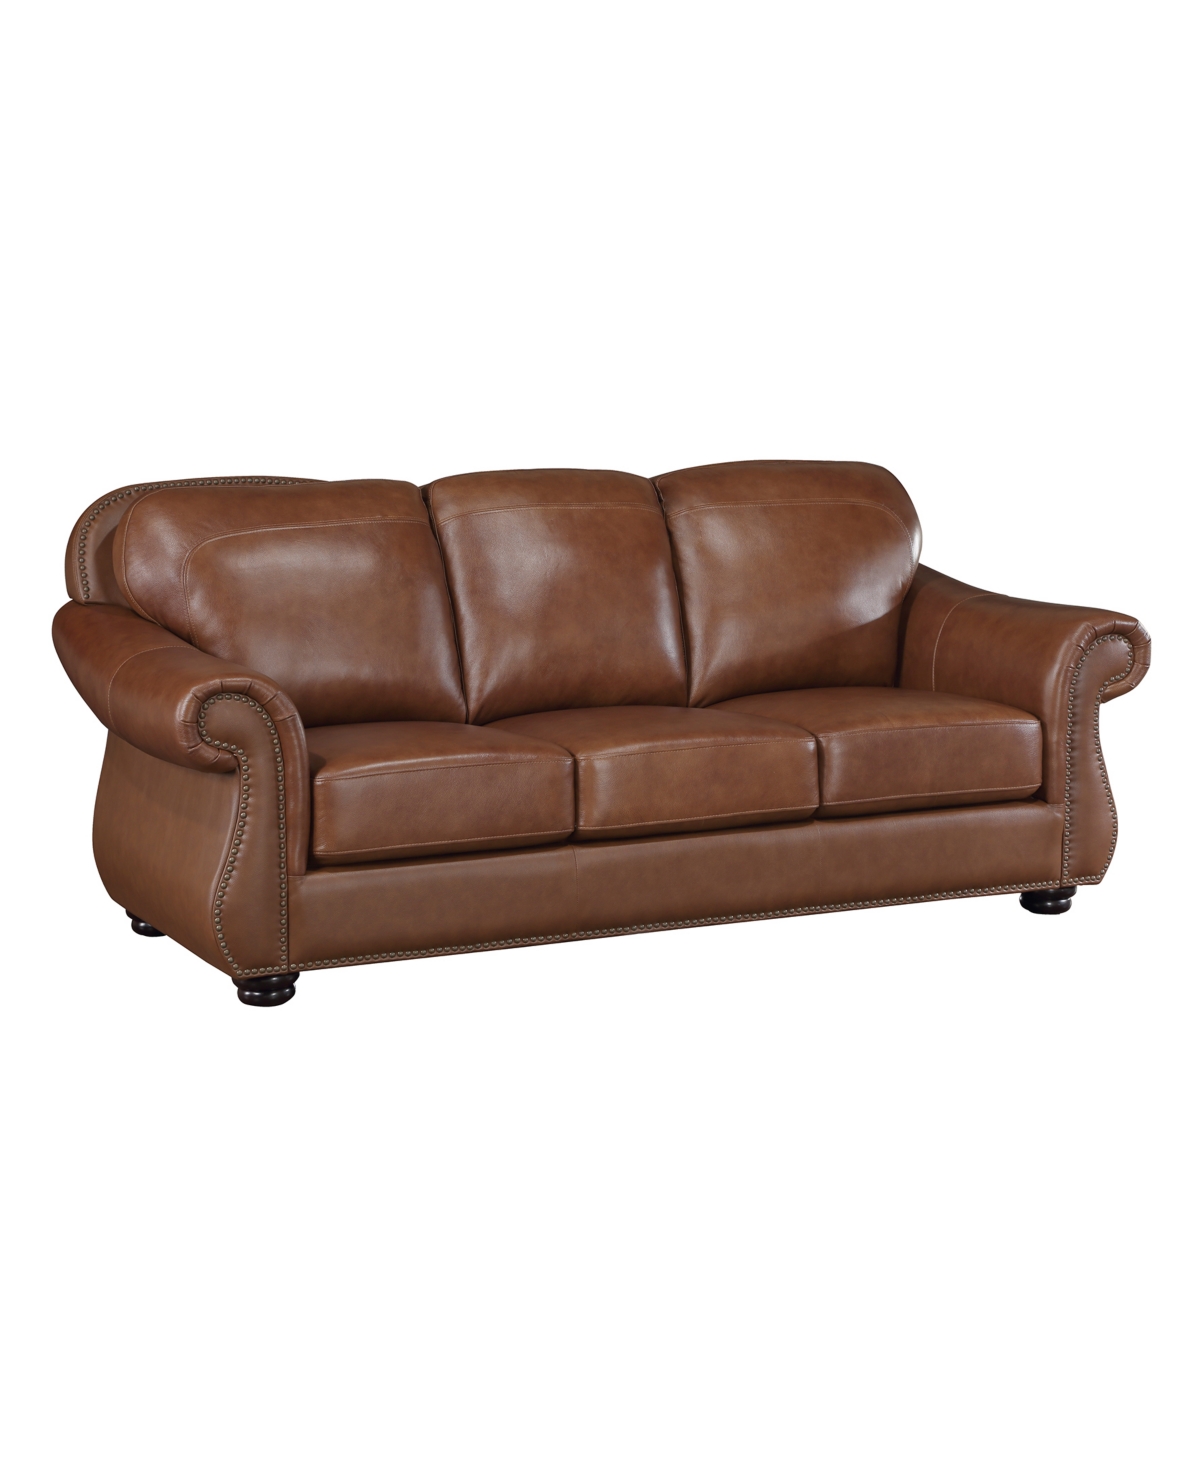 Homelegance White Label Dadeville 85" Leather Match Sofa In Camel Brown